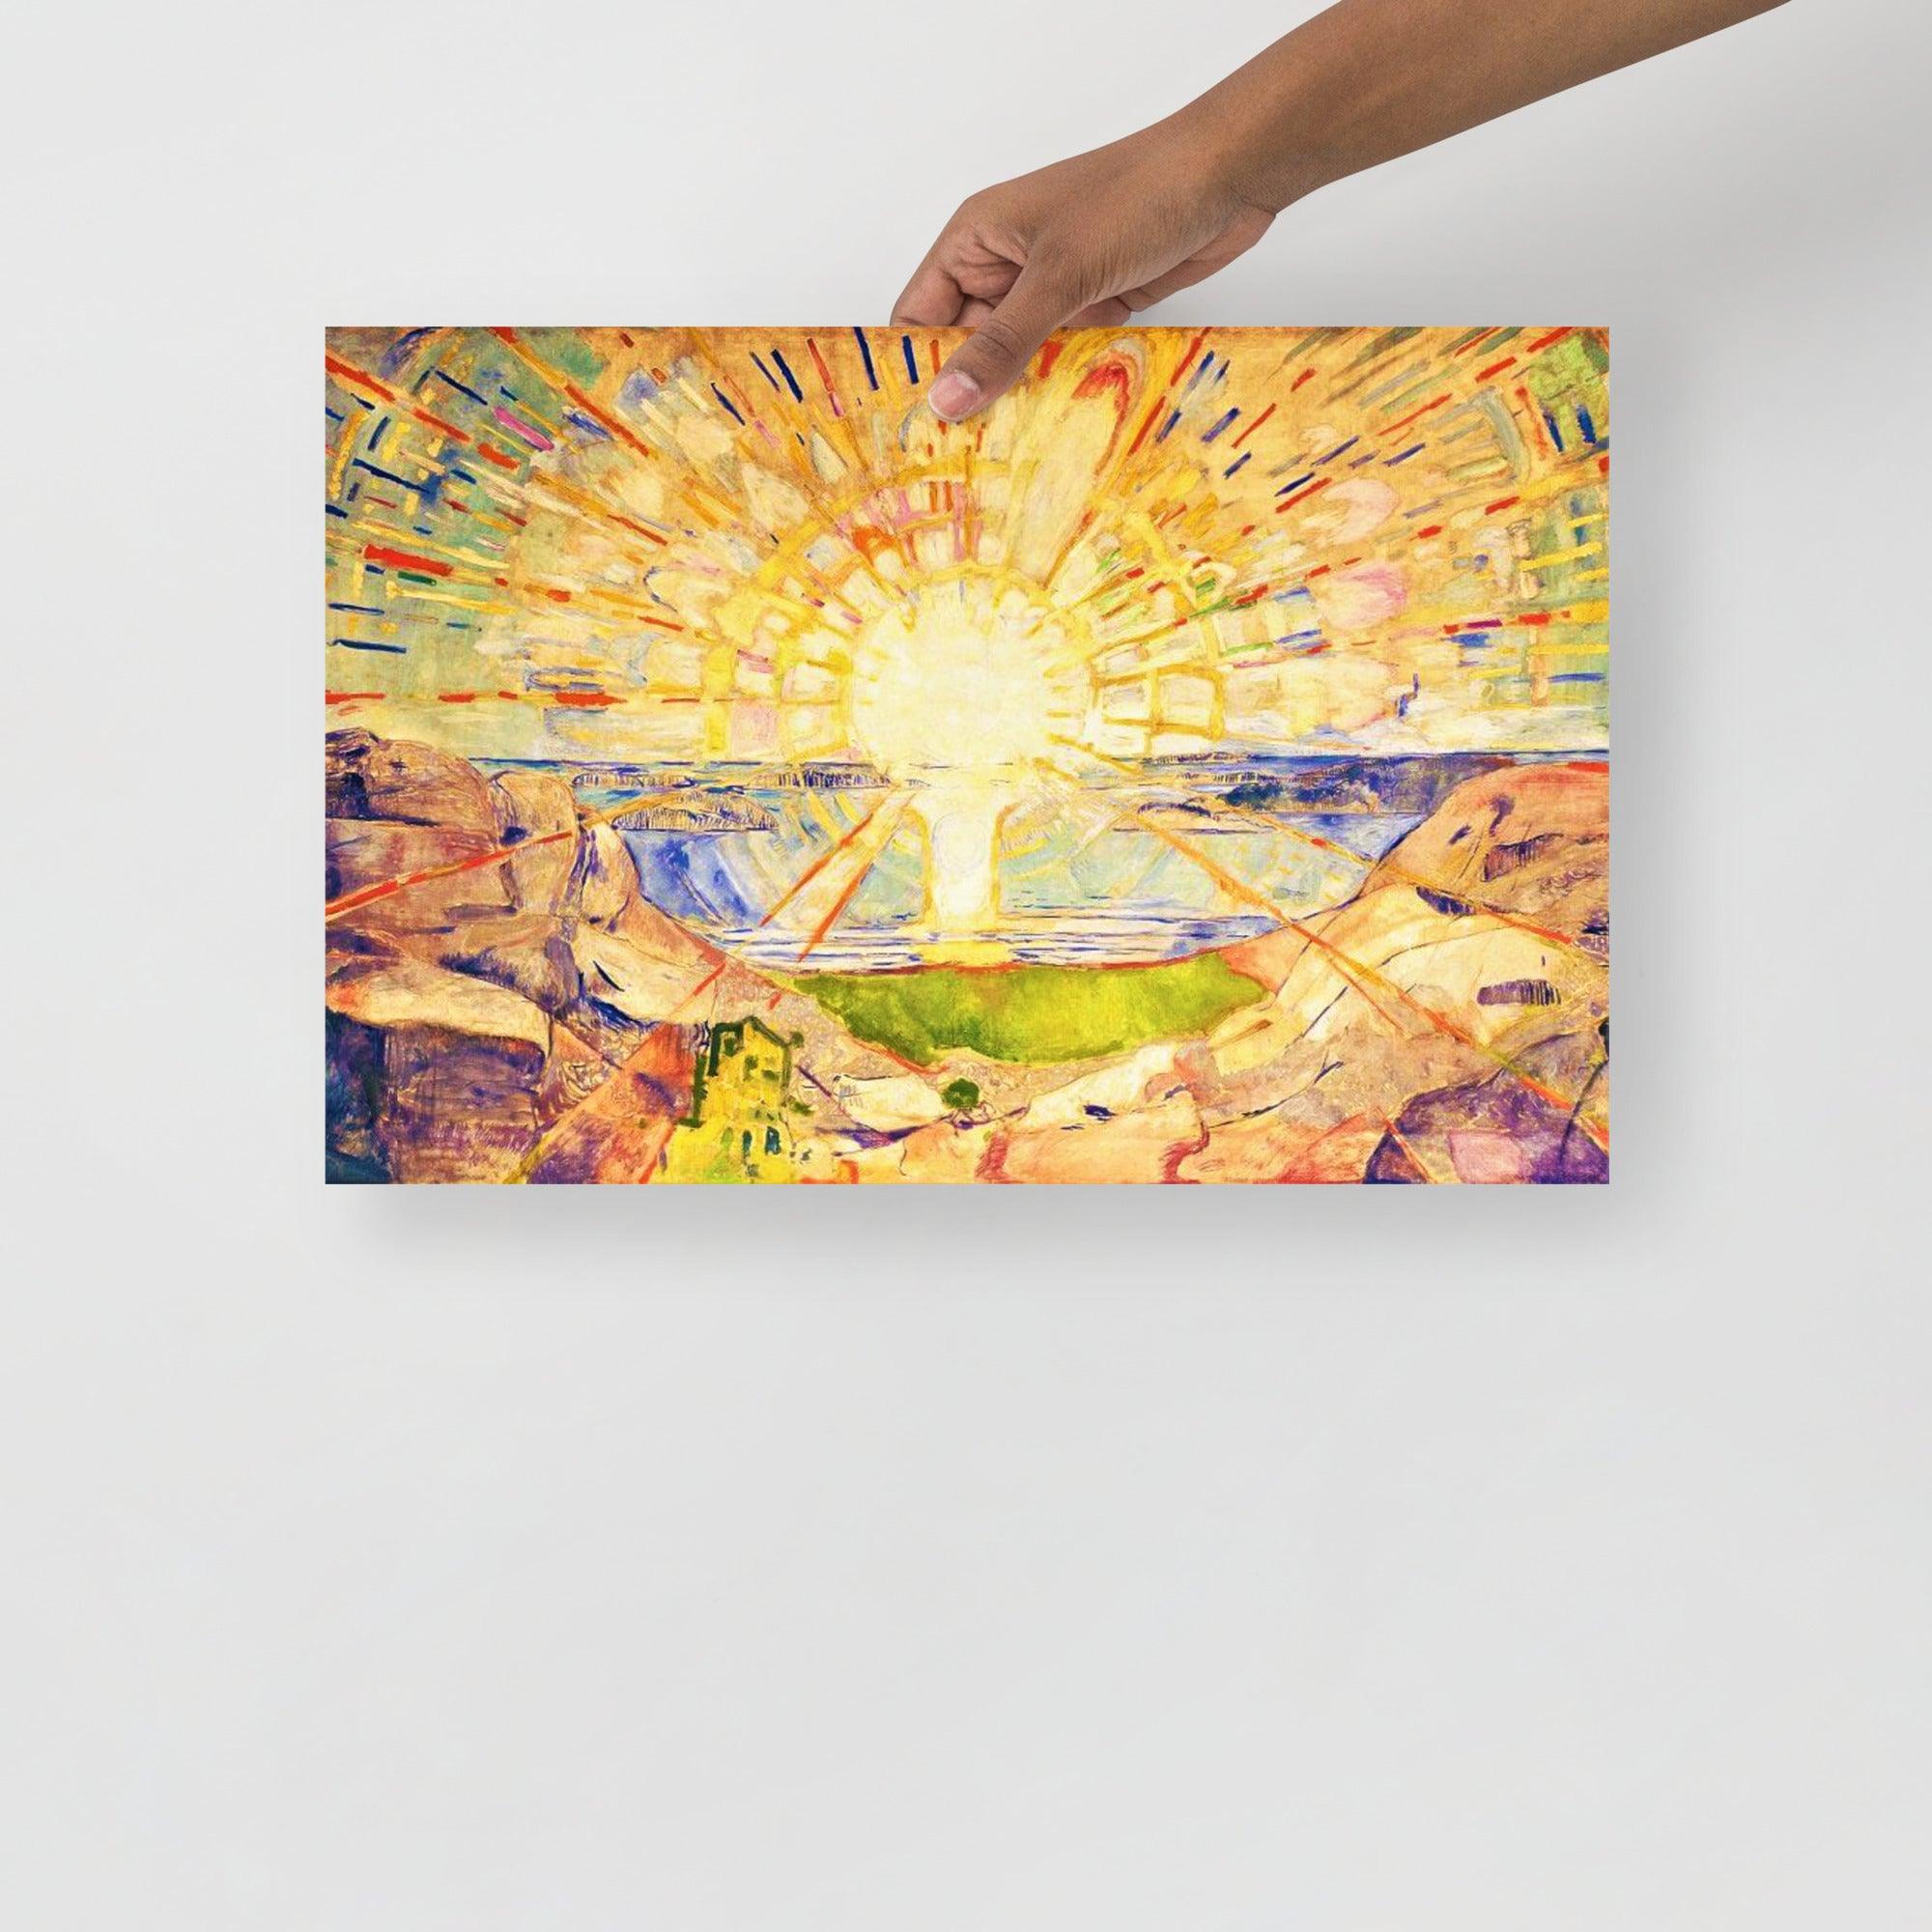 The Sun By Edvard Munch poster on a plain backdrop in size 12x18”.